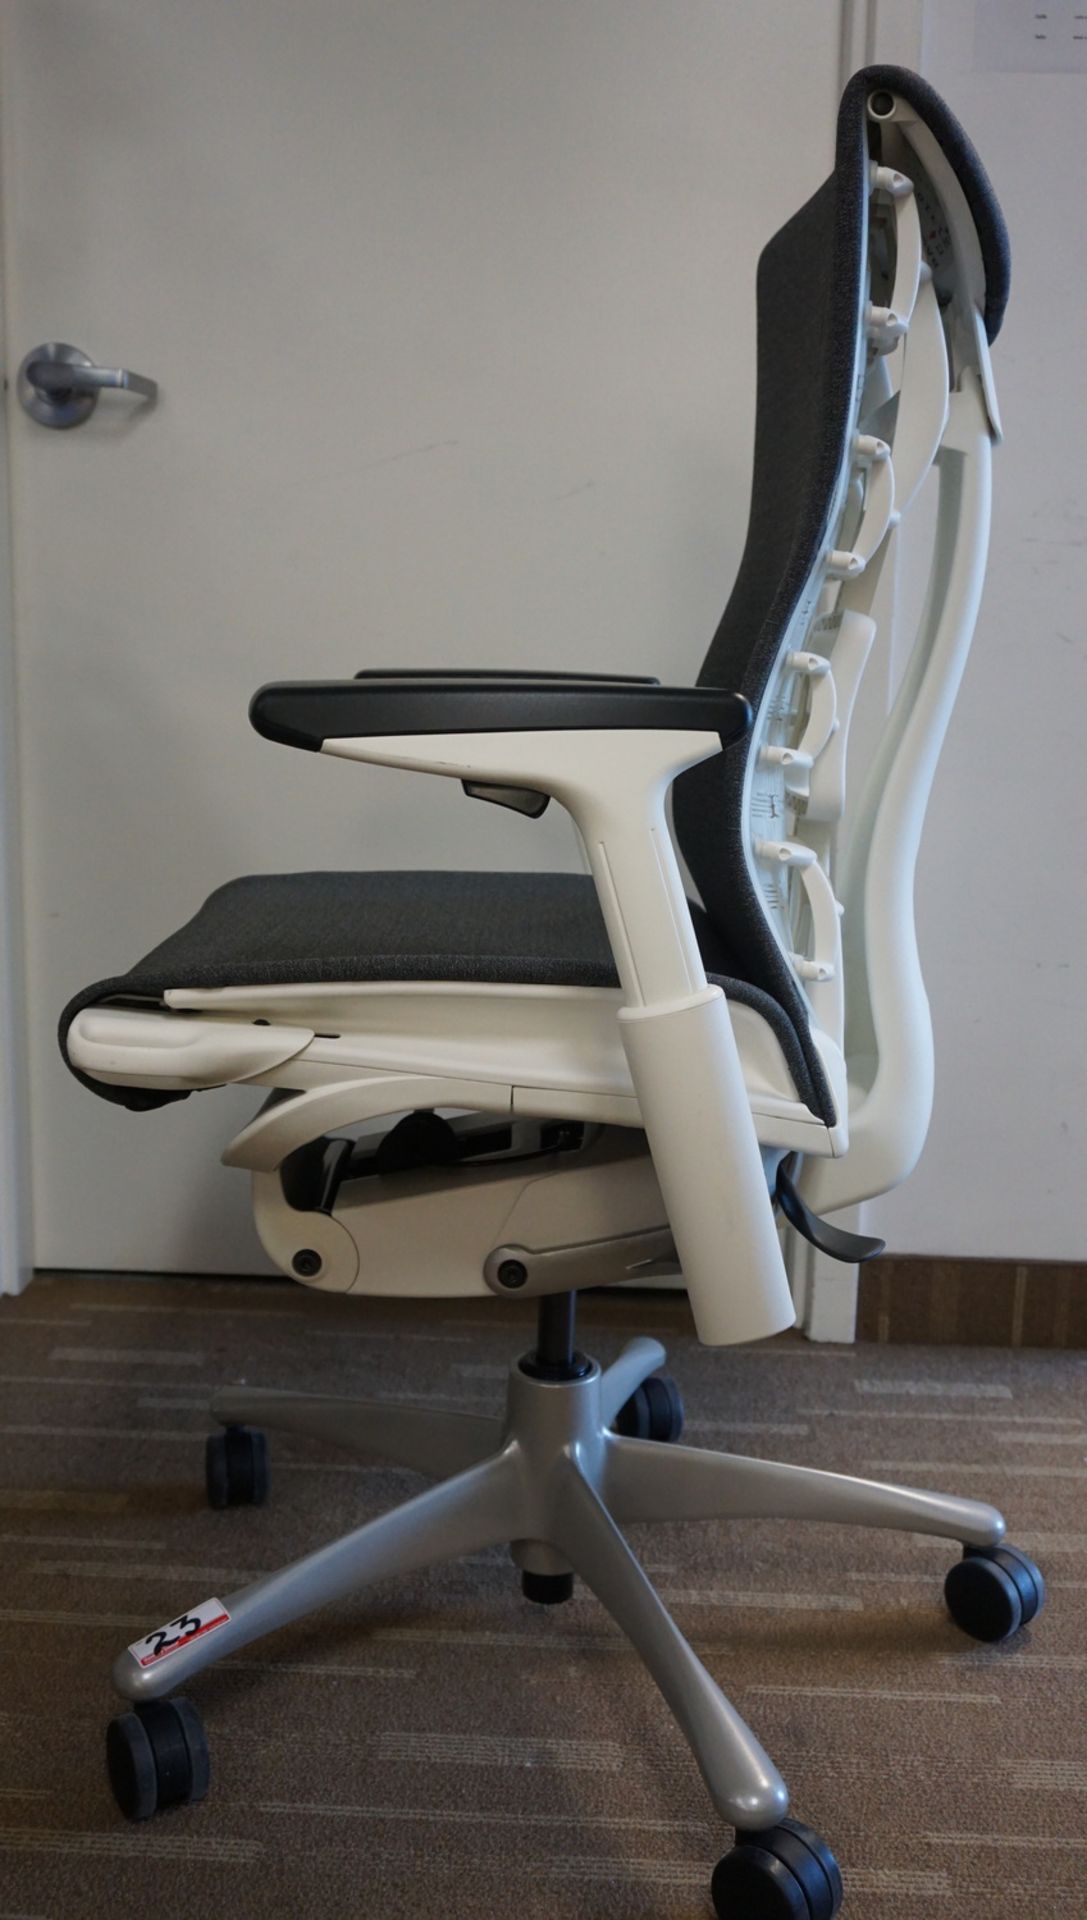 HERMAN MILLER EMBODY OFFICE CHAIR W/ WHITE FRAME, TITANIUM BASE, & GREY FABRIC ($2,700 MSRP) - Image 4 of 4